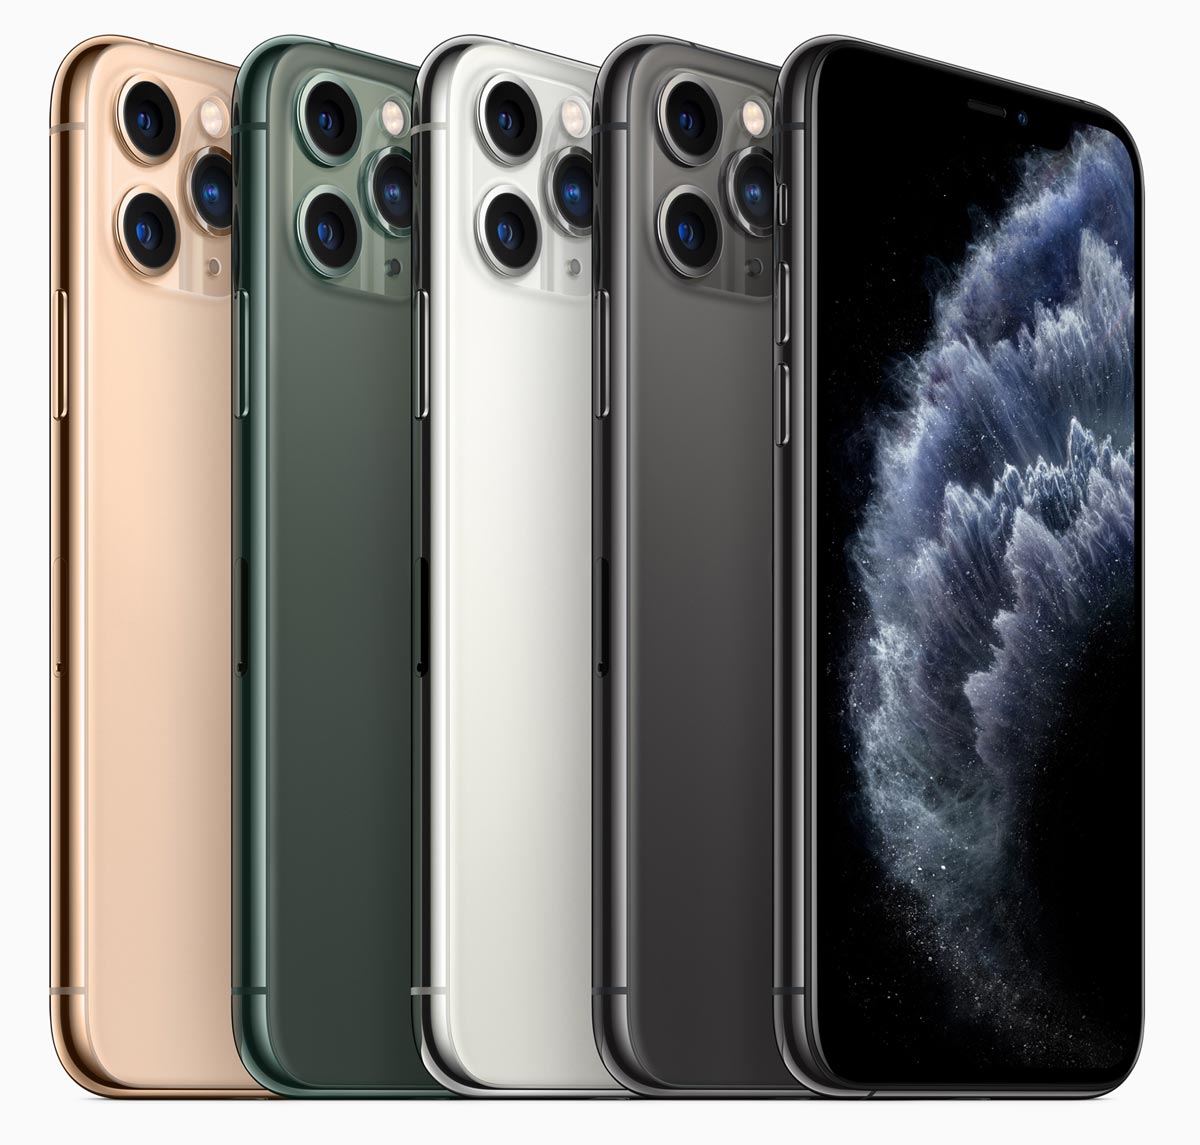 The iPhone 11 Pro and 11 Pro Max come in four color variations